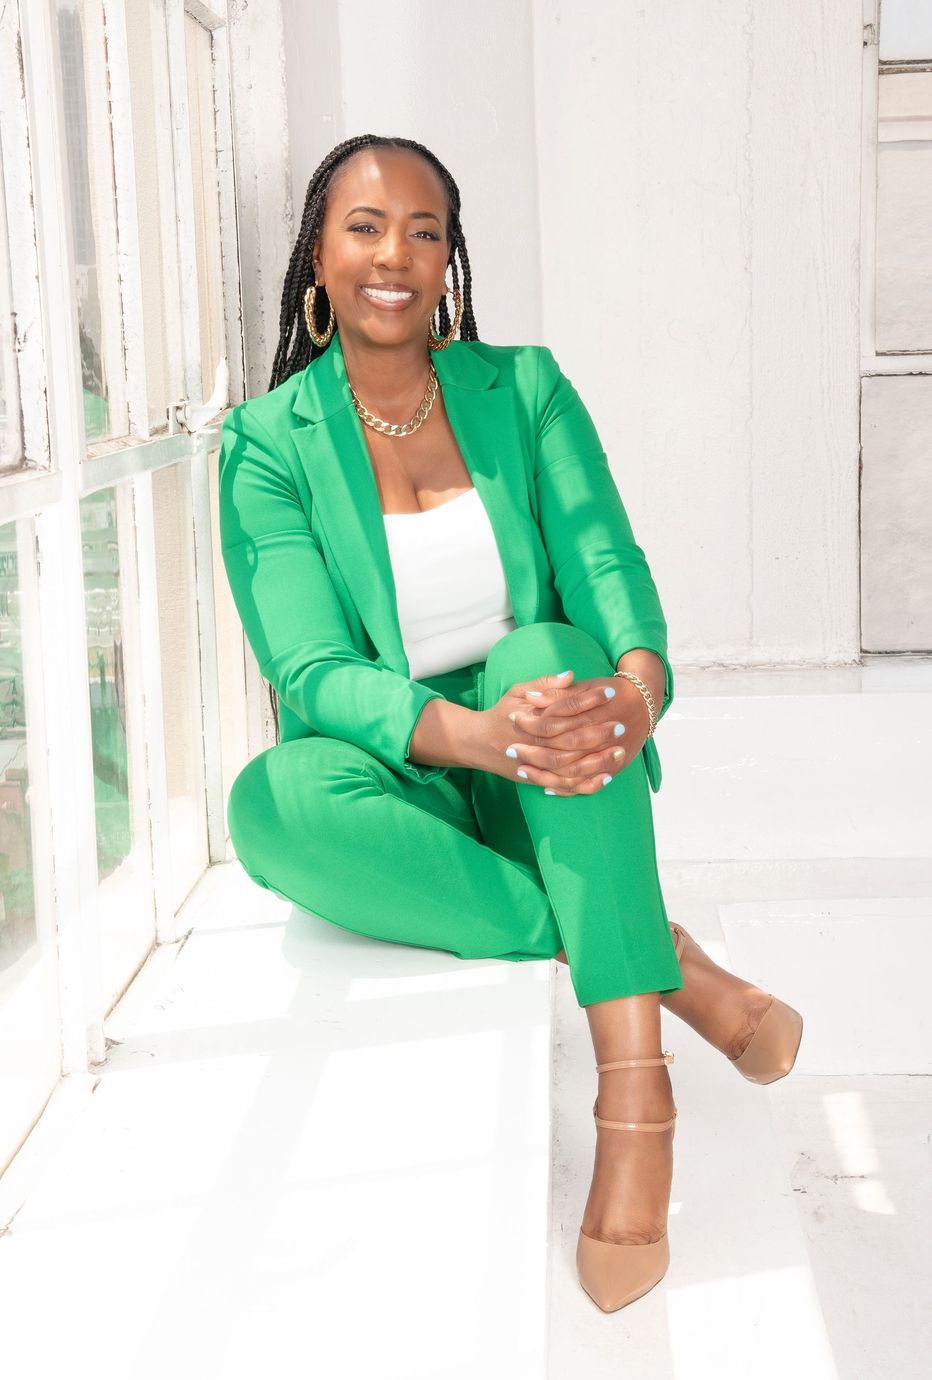 A woman in a green suit is sitting on a white box.